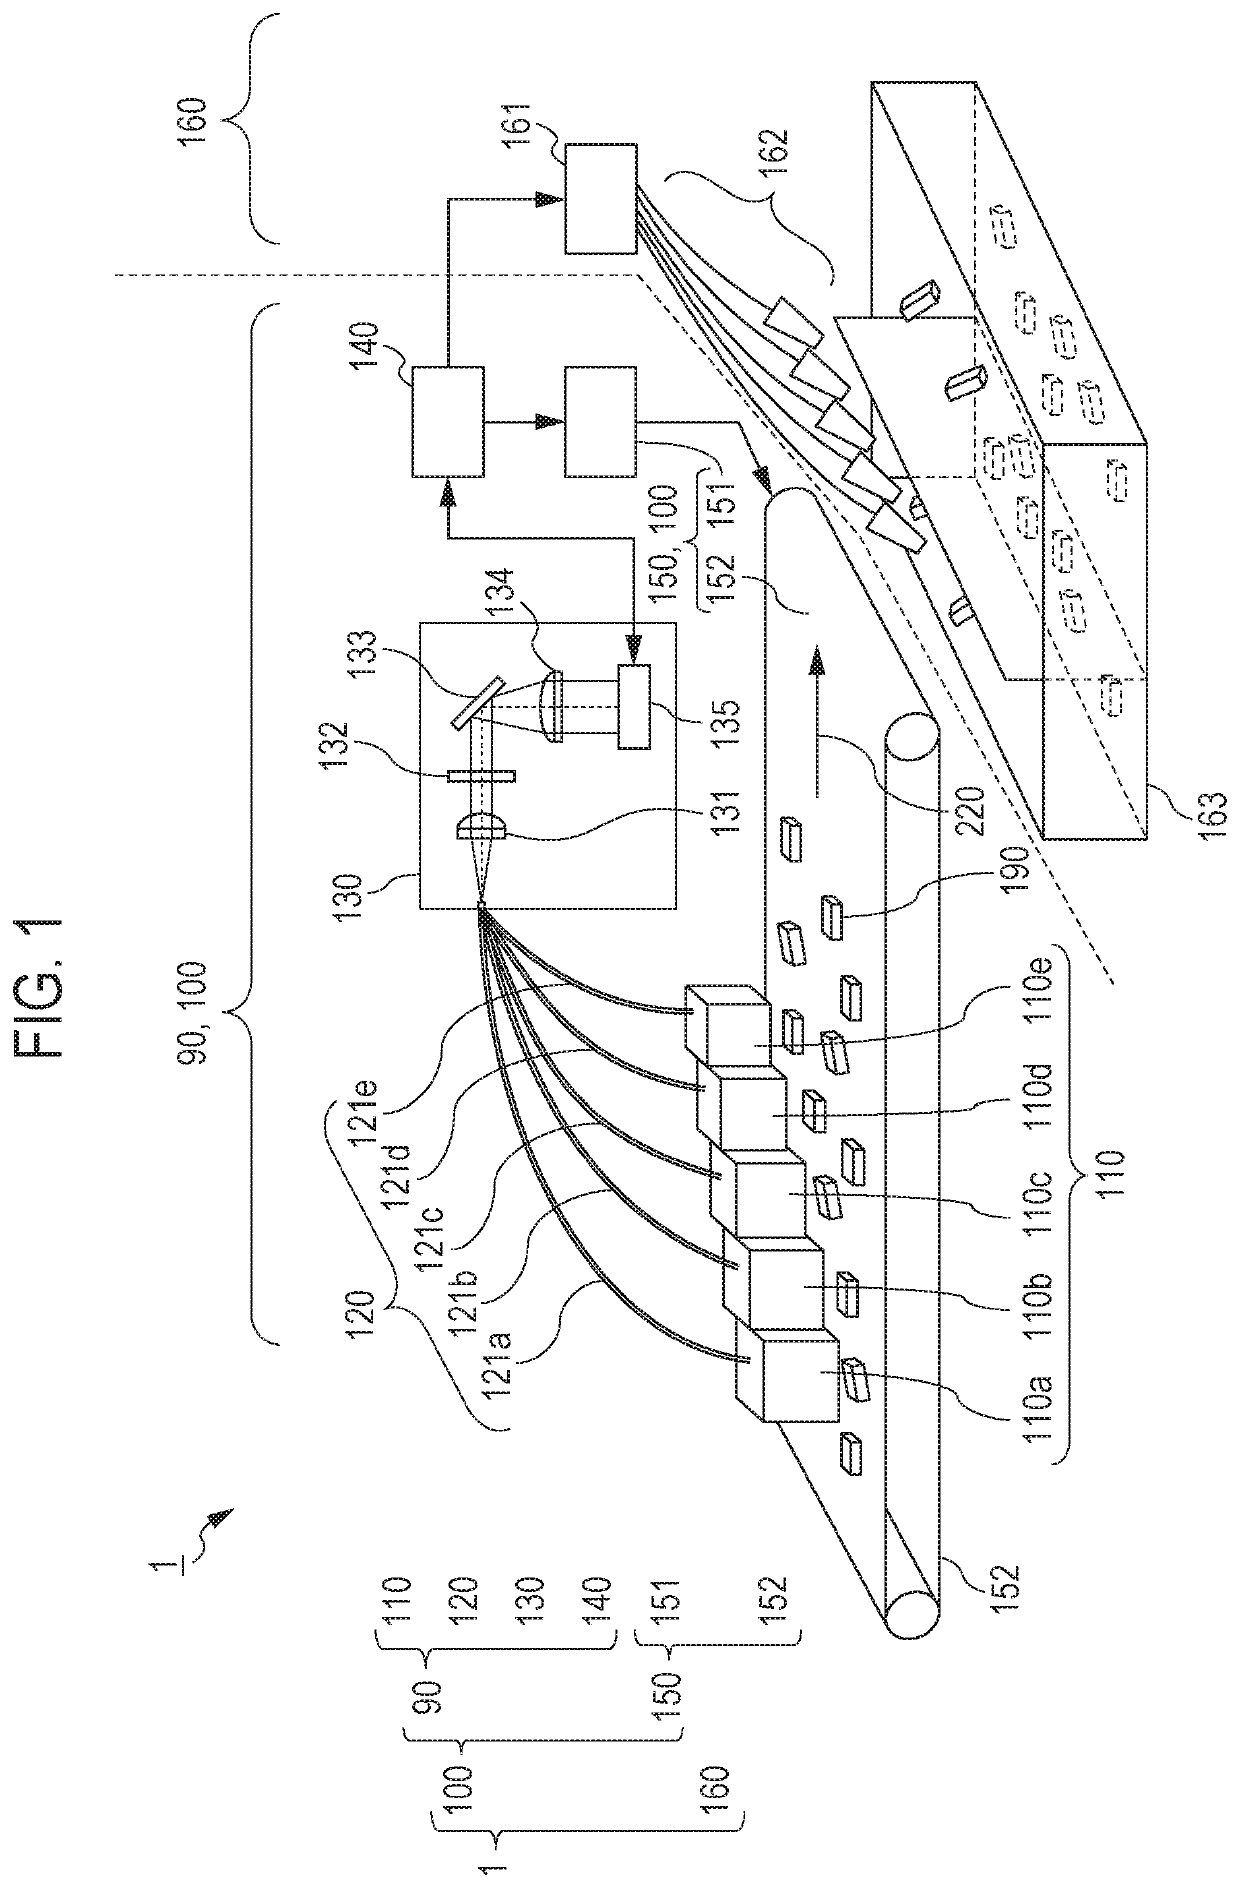 Identification apparatus and sorting system